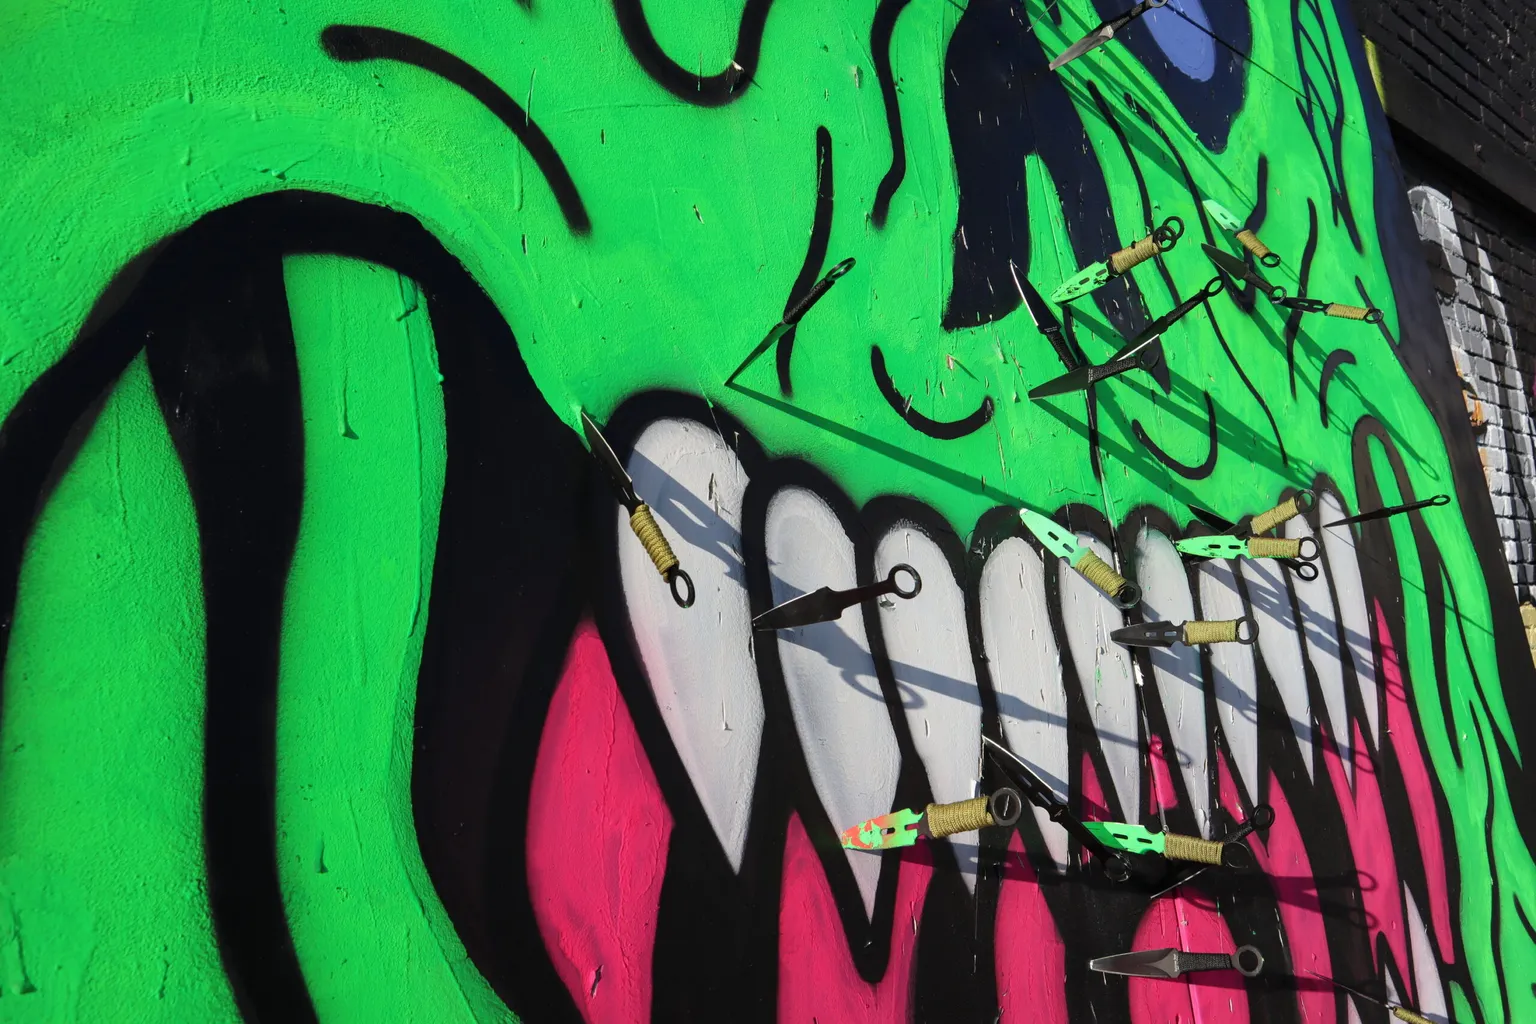 Closeup photograph of Will Carsola's painting of a green demon's mouth, with knives thrown into it.